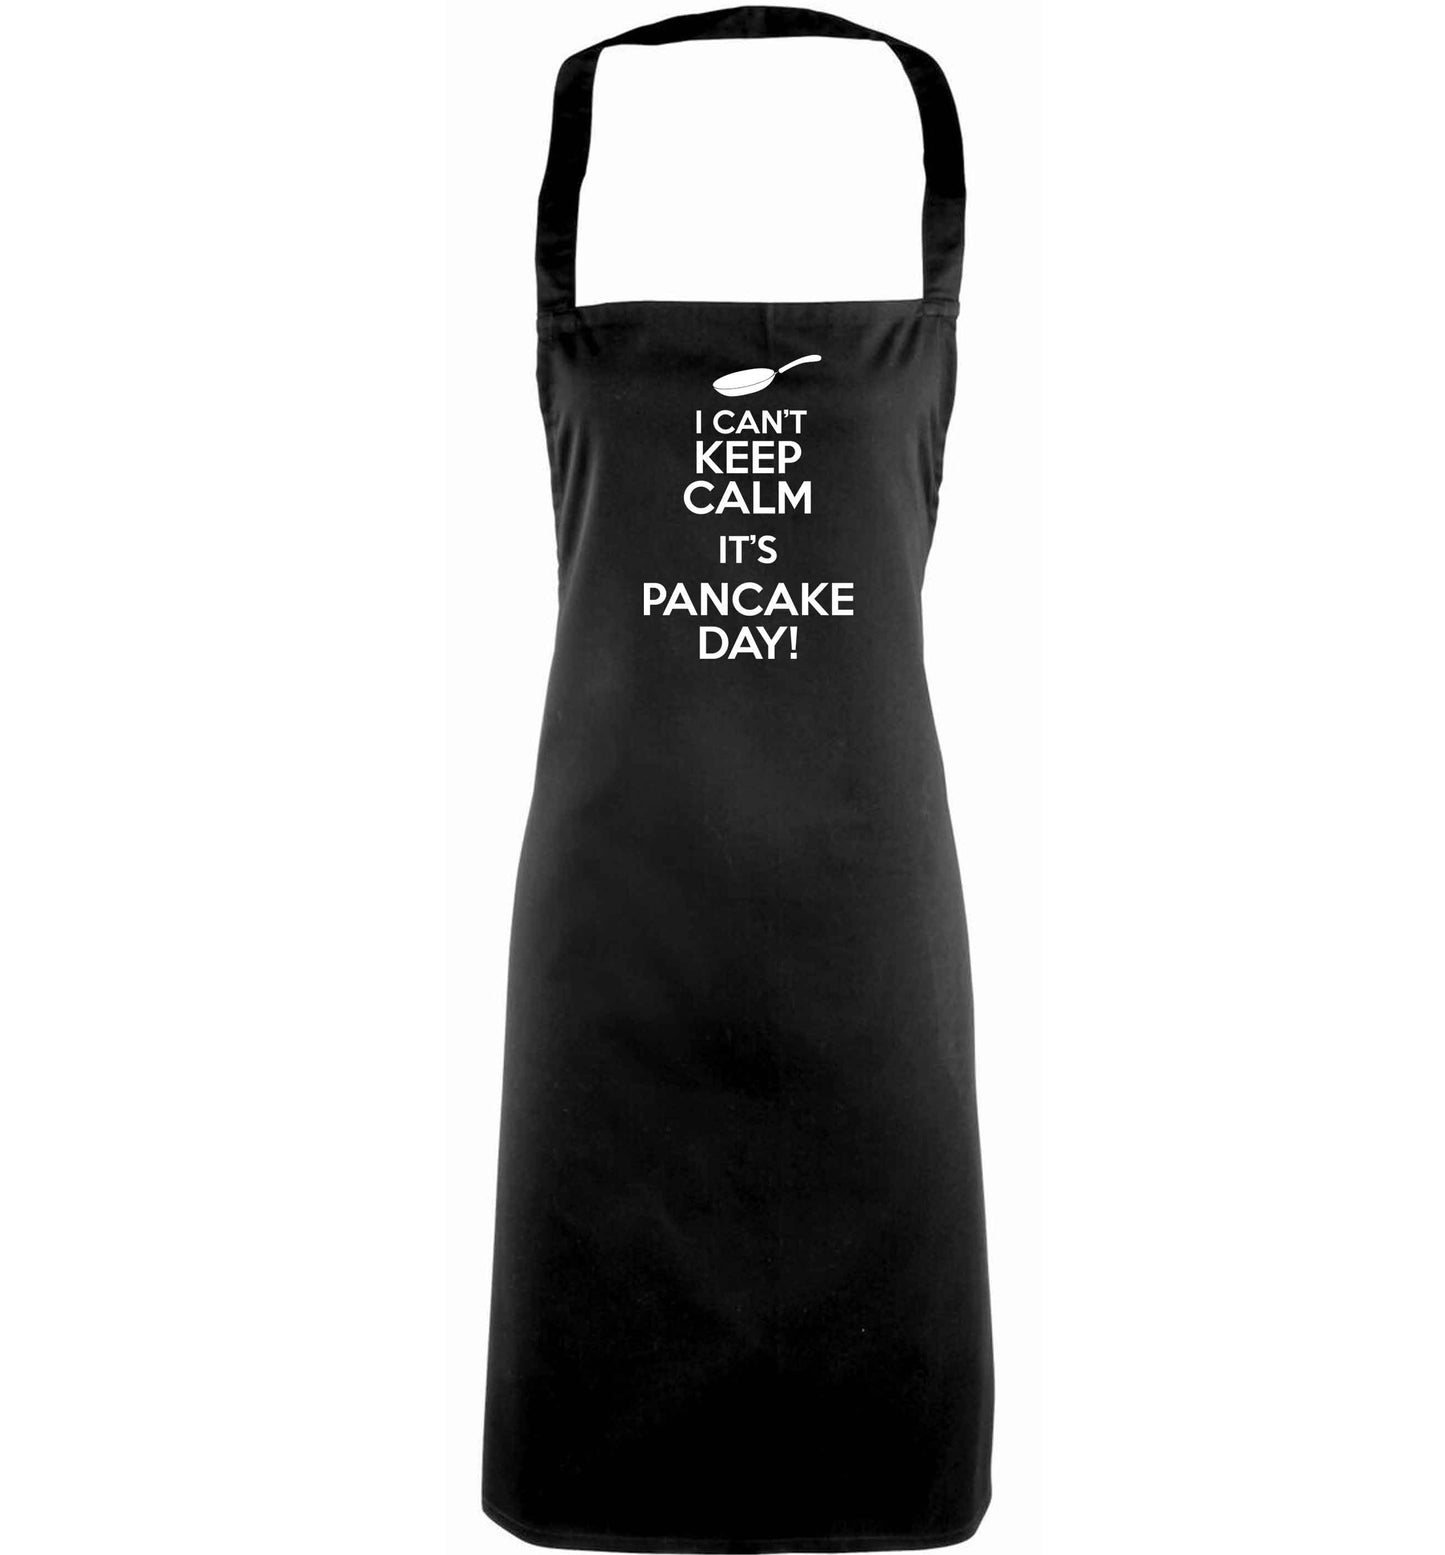 I can't keep calm it's pancake day! adults black apron